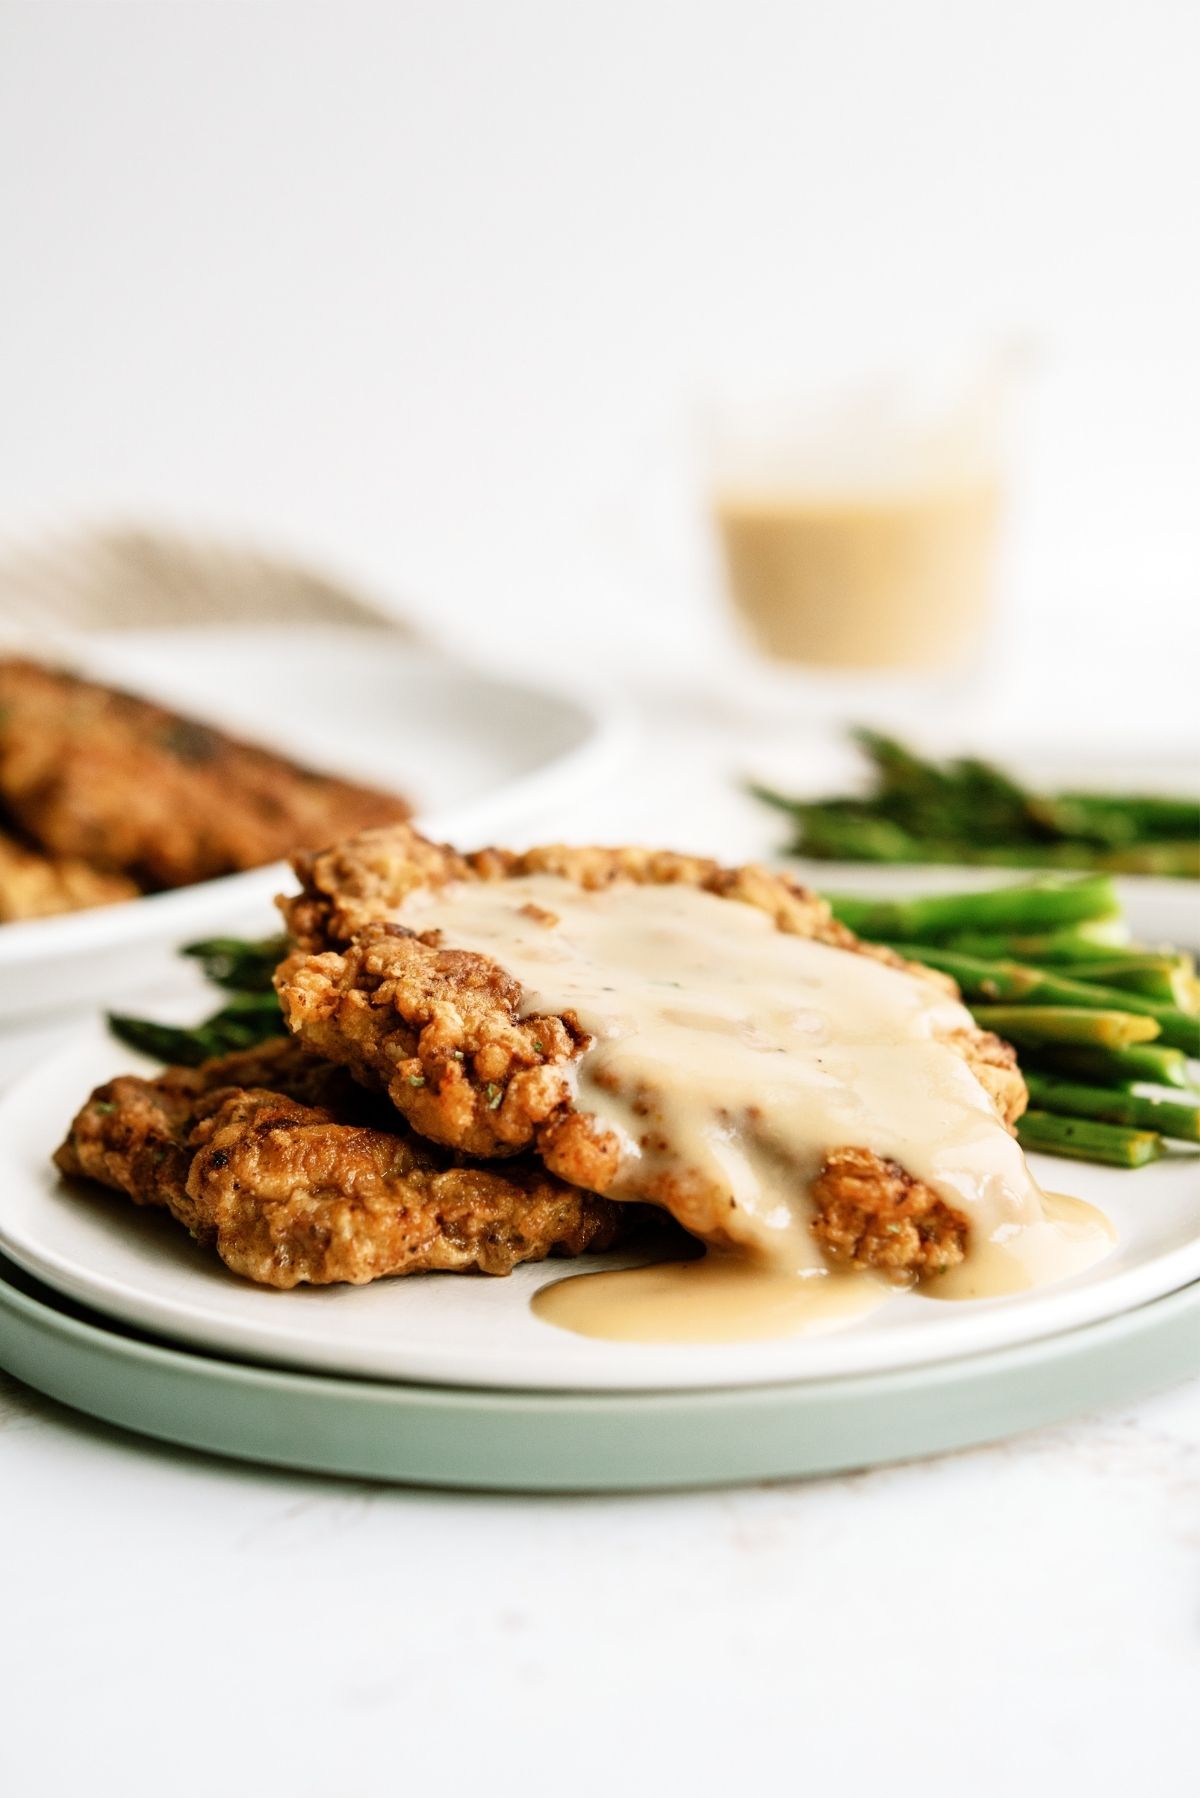 Chicken Fried Steak with Gravy on a plate served with asparagus